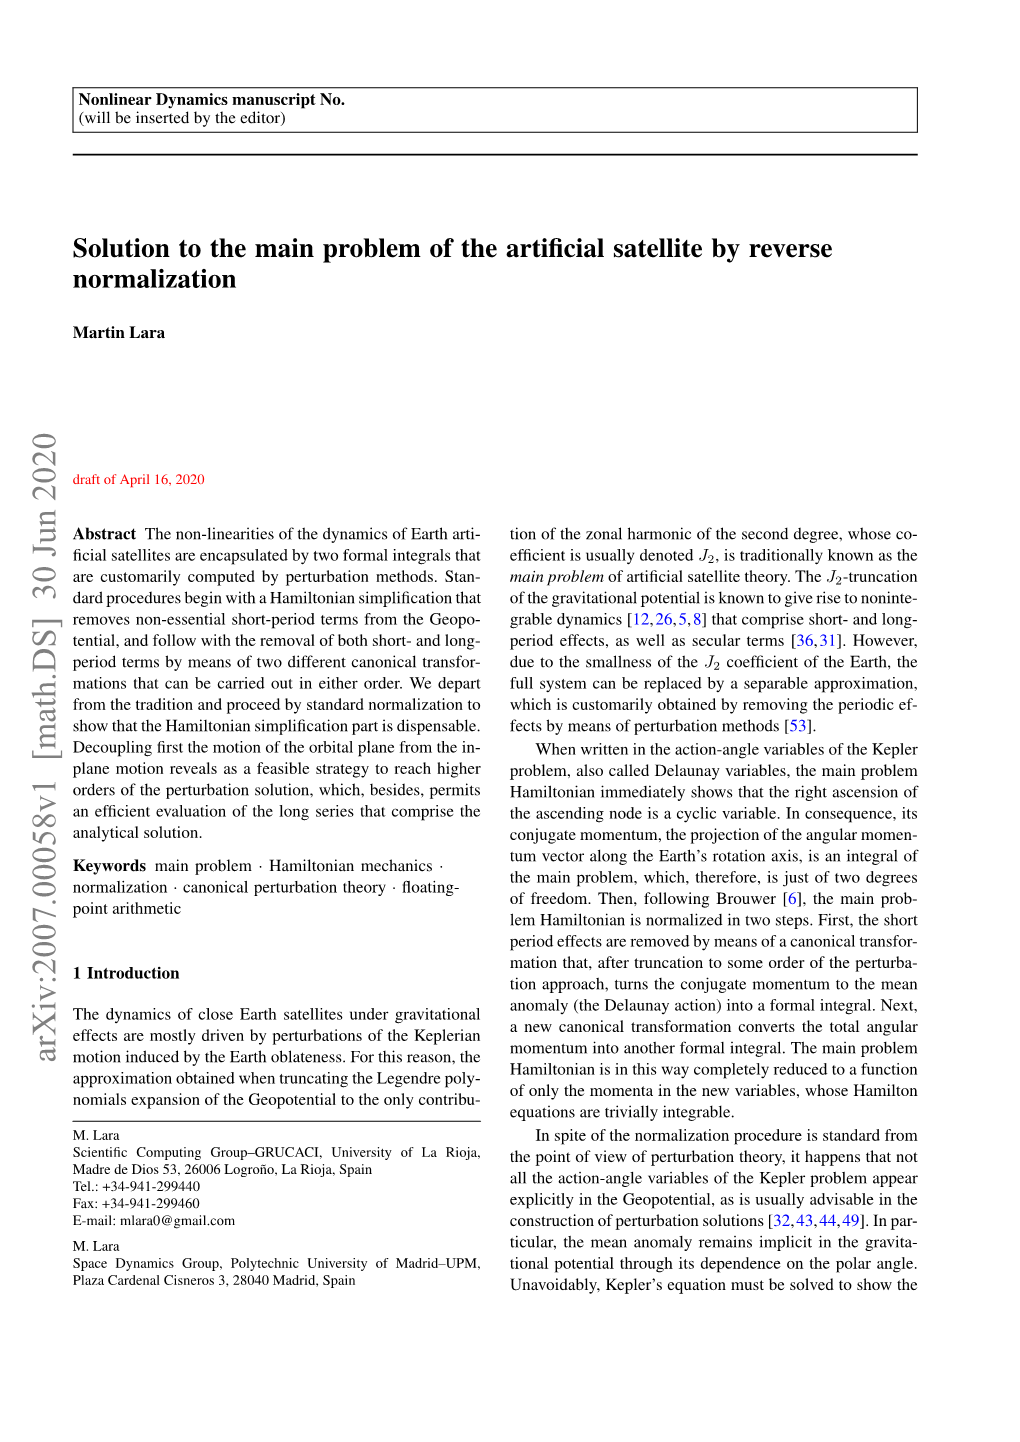 Solution to the Main Problem of the Artificial Satellite by Reverse